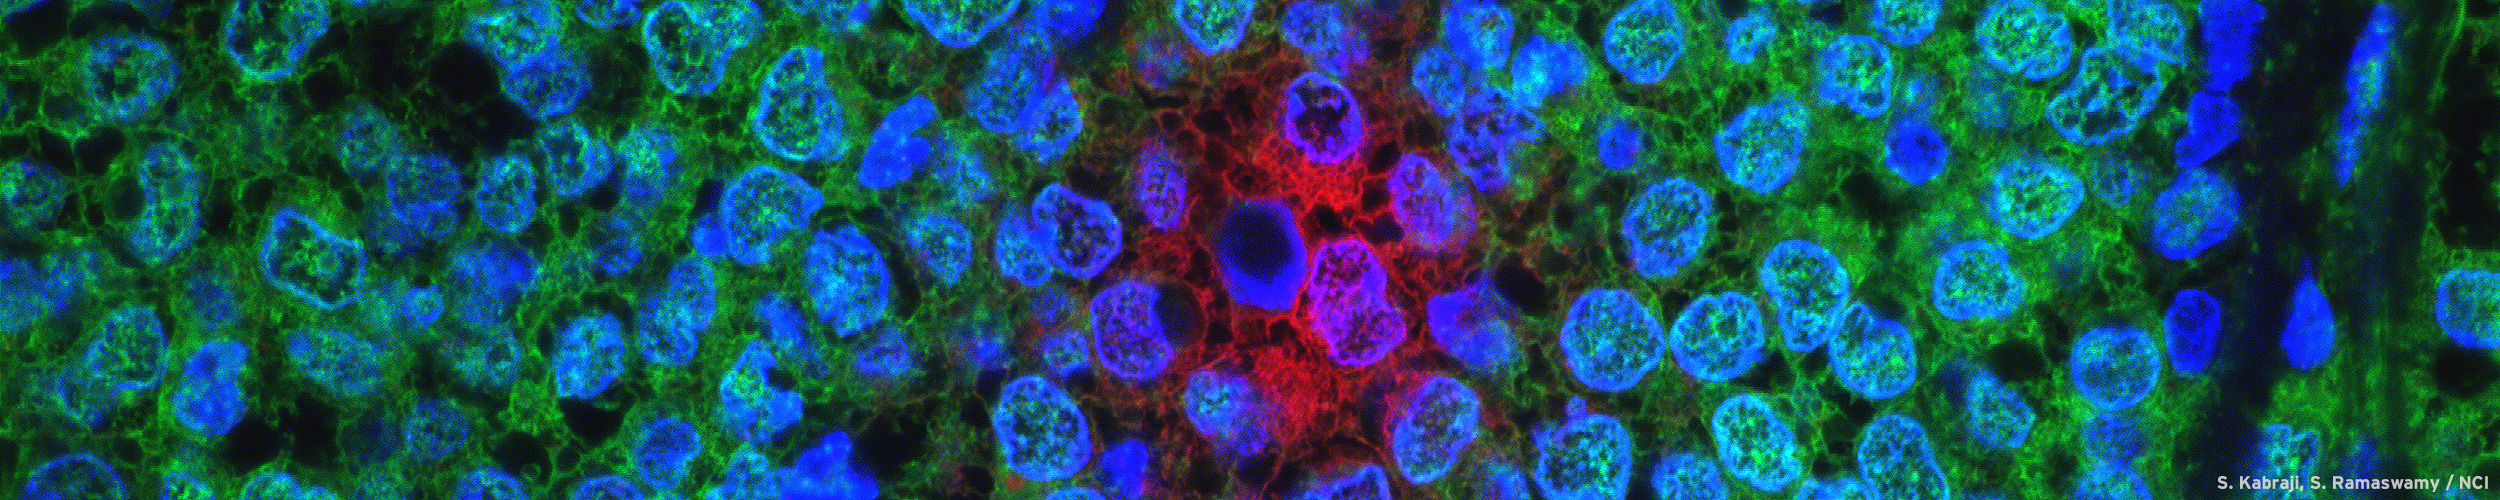 Treatment-Resistant Breast Cancer Cells